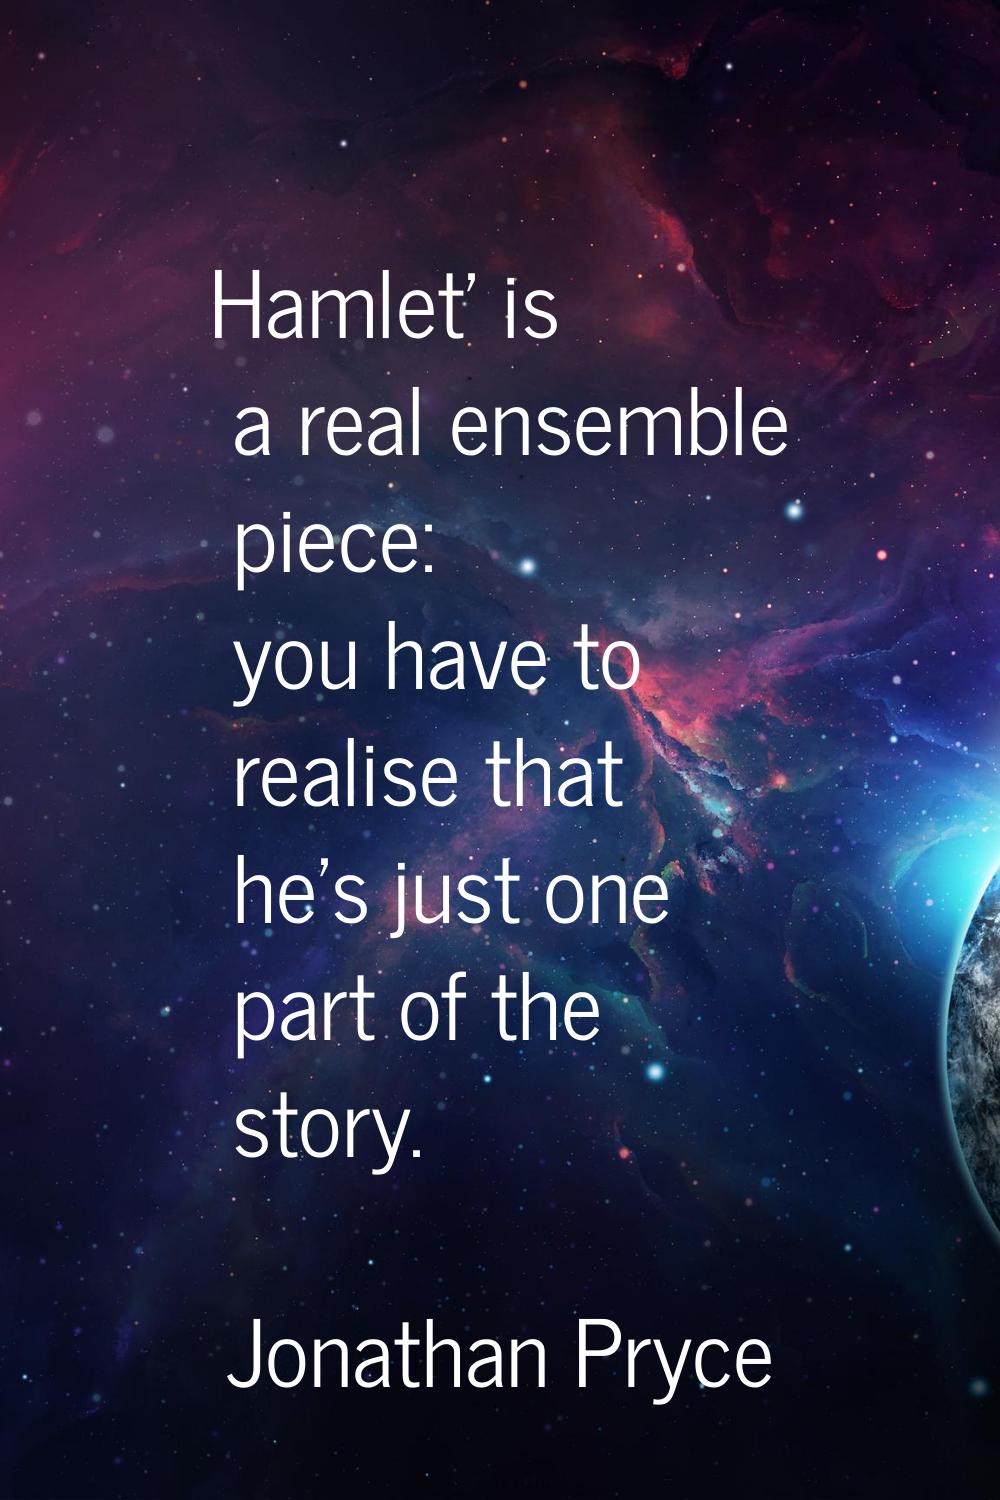 Hamlet' is a real ensemble piece: you have to realise that he's just one part of the story.